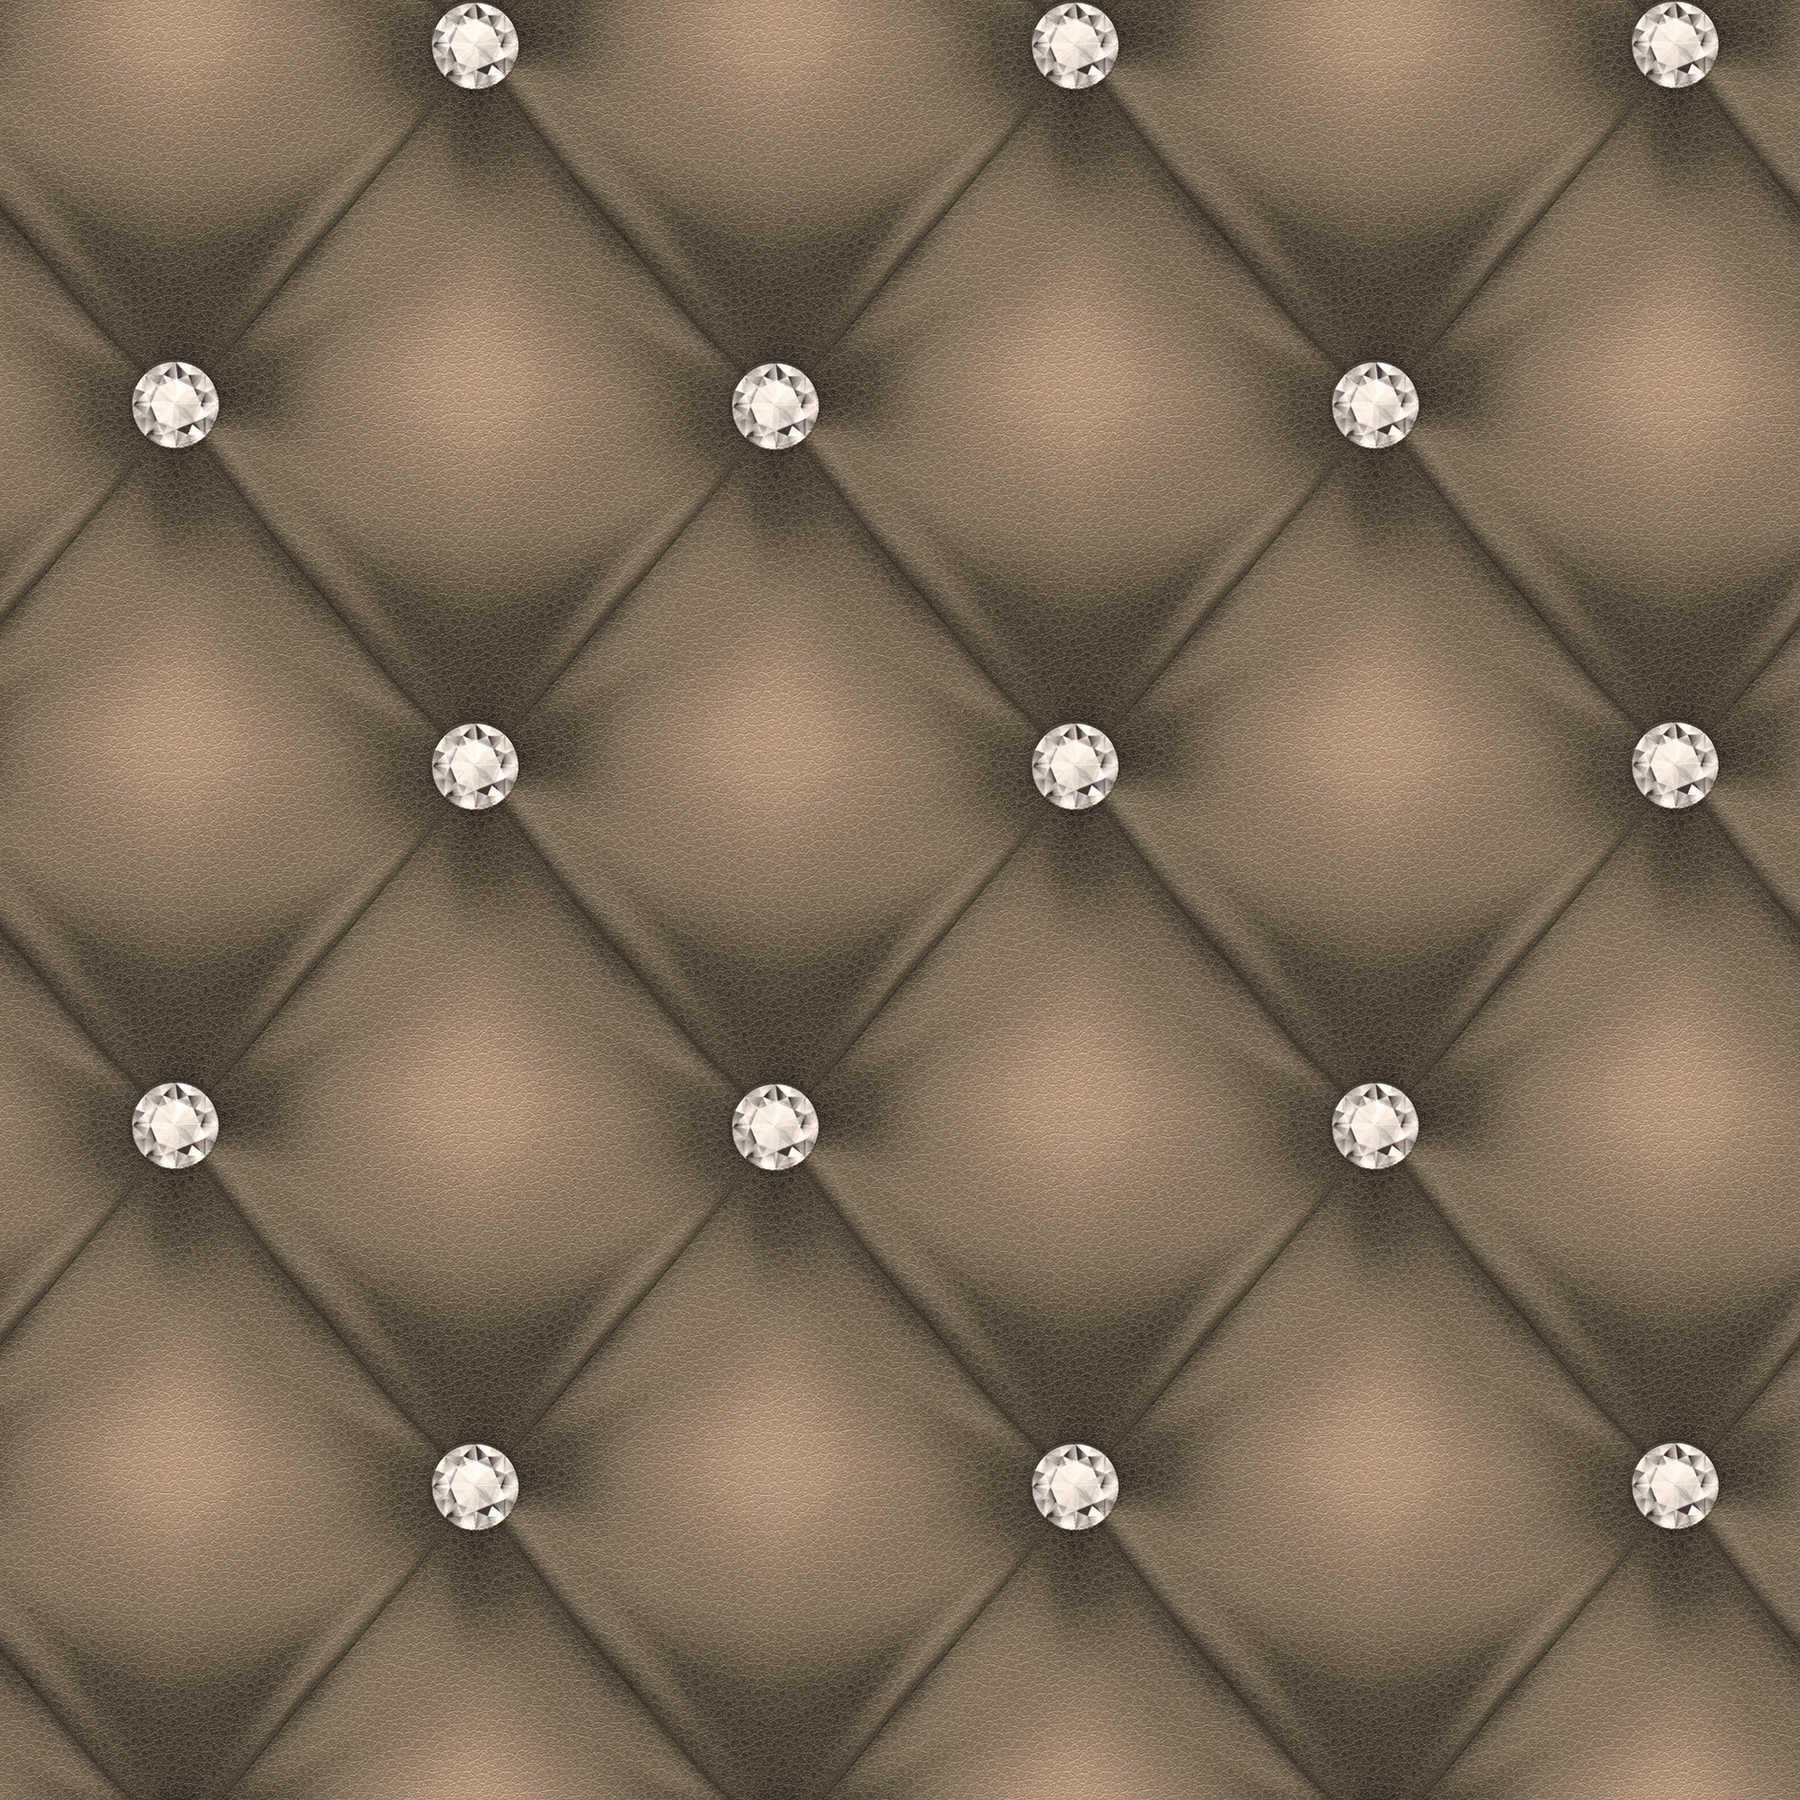         Diamonds non-woven wallpaper with leather upholstery look - Brown, Metallic
    